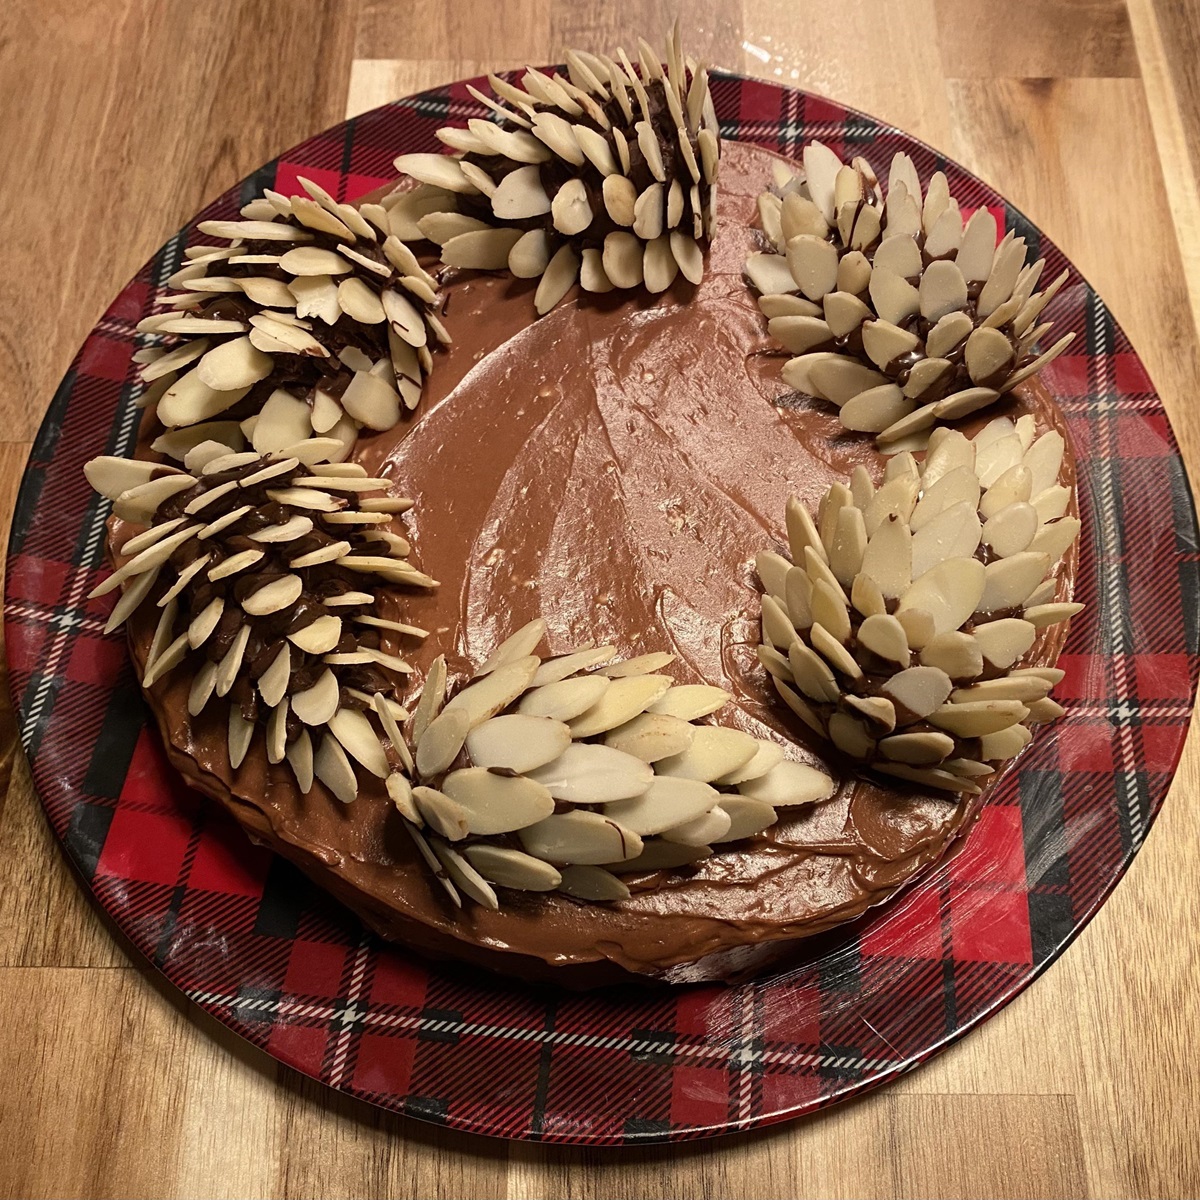 Every Christmas Eve, I Make Julia Child's Queen Of Sheba Cake With Chocolate Almond Pine Cones